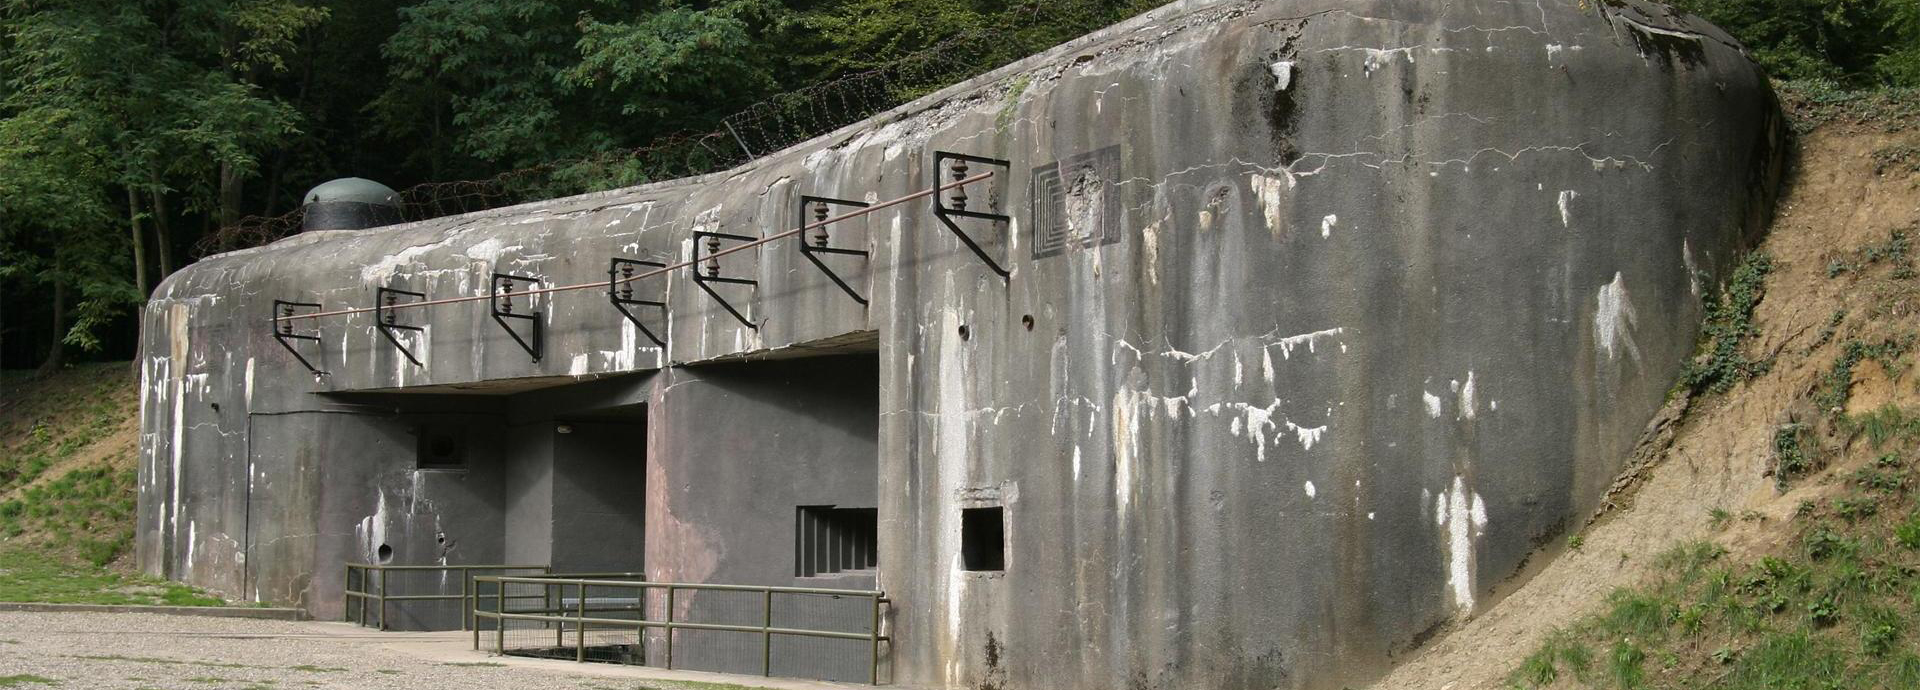 The Maginot Line, an imposing fortified system